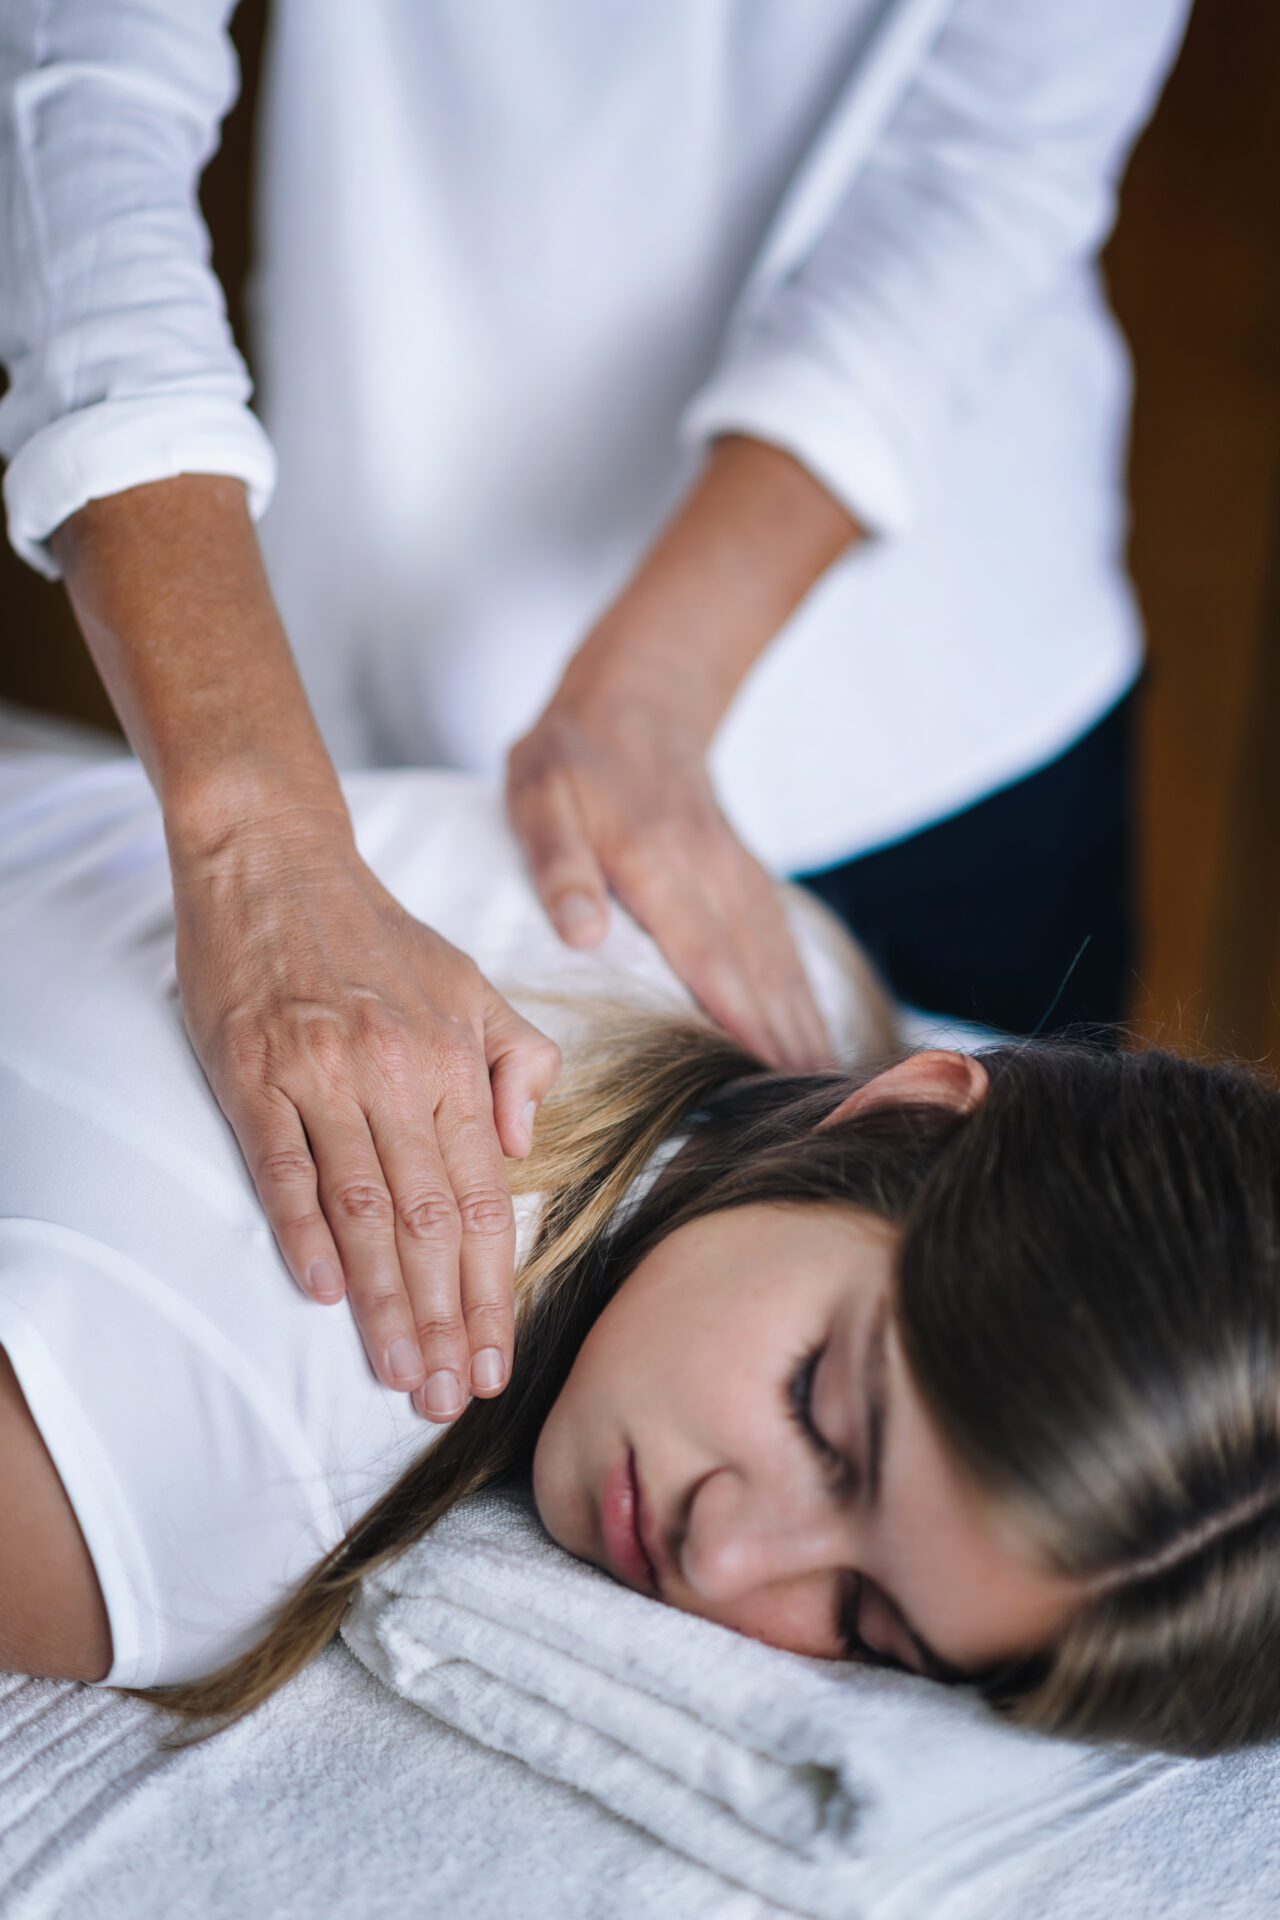 Vertical image of female Reiki therapist holding hands over shoulders of the patient and transfer energy. Peaceful teenage girl lying with her eyes closed. Alternative therapy concept of stress reduction and relaxation.